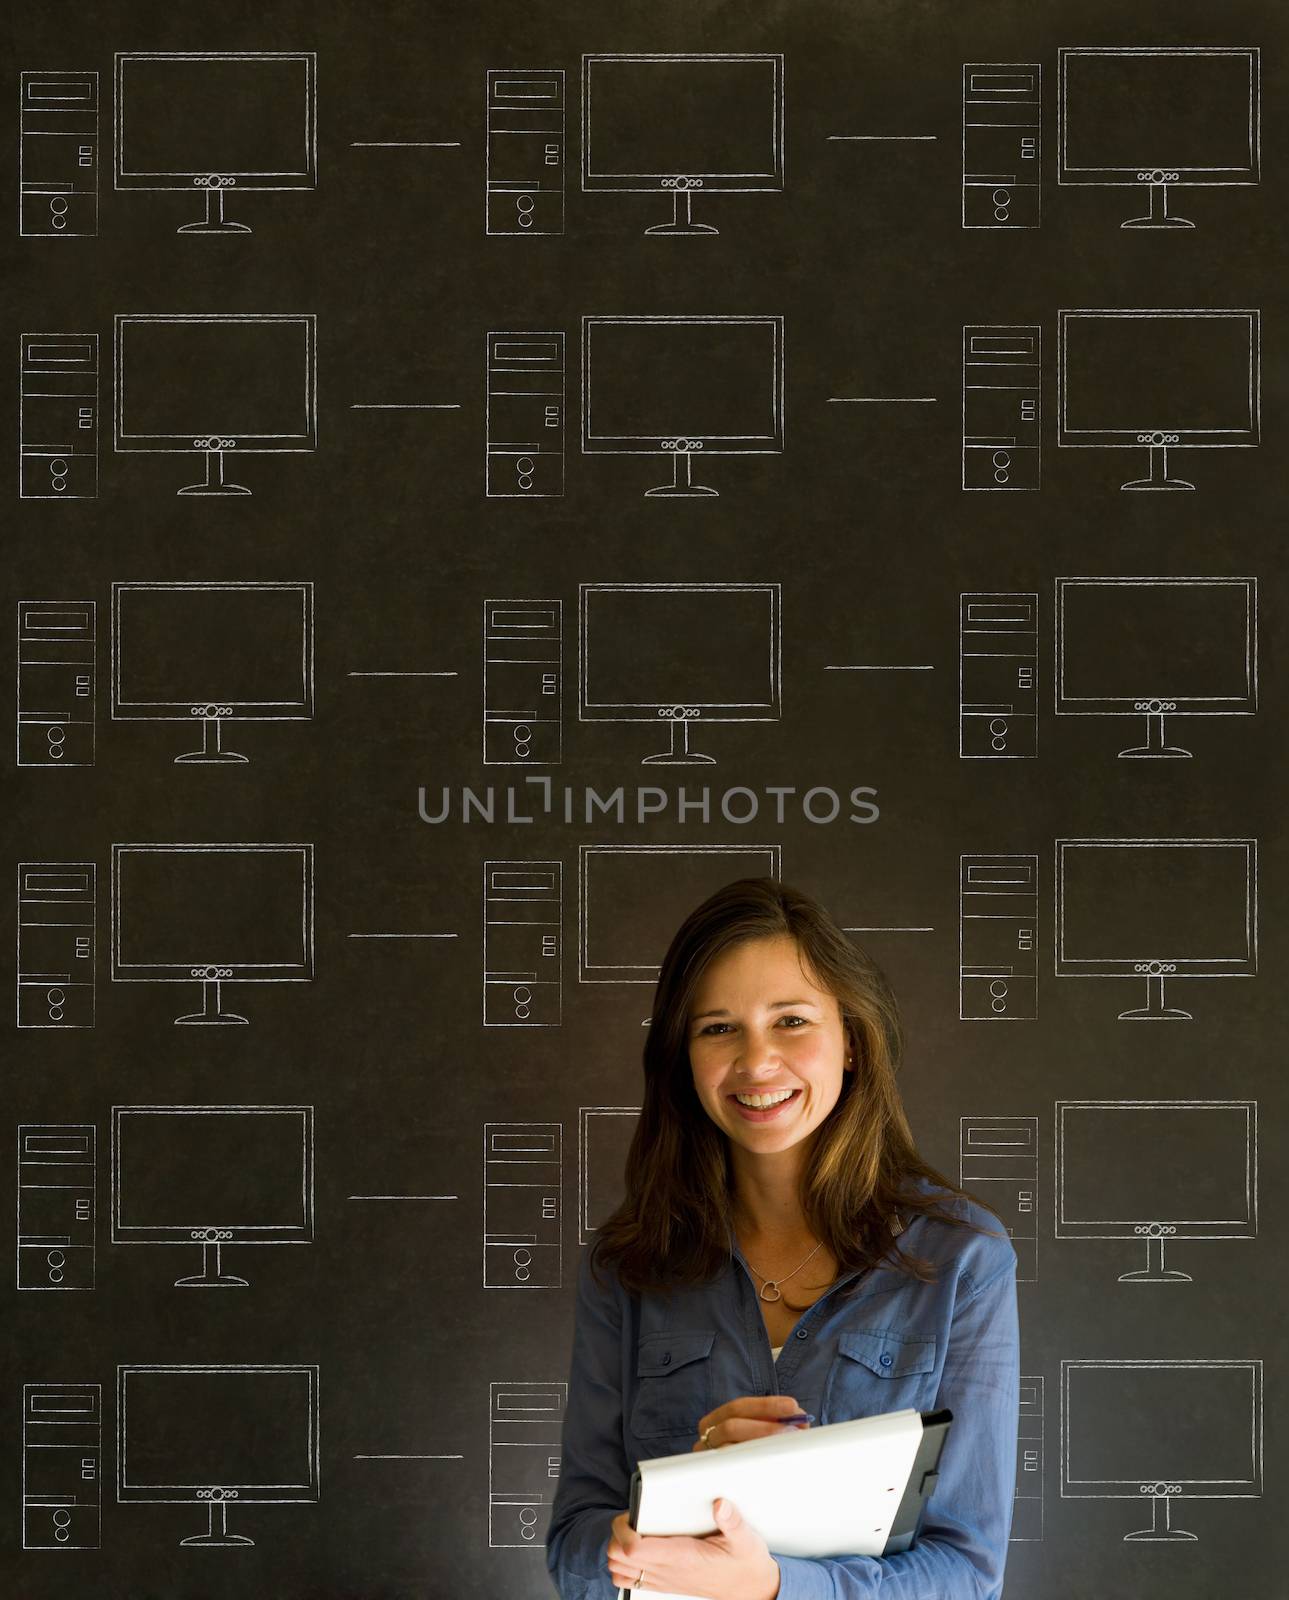 Businesswoman, student or teacher with chalk networks on blackboard background